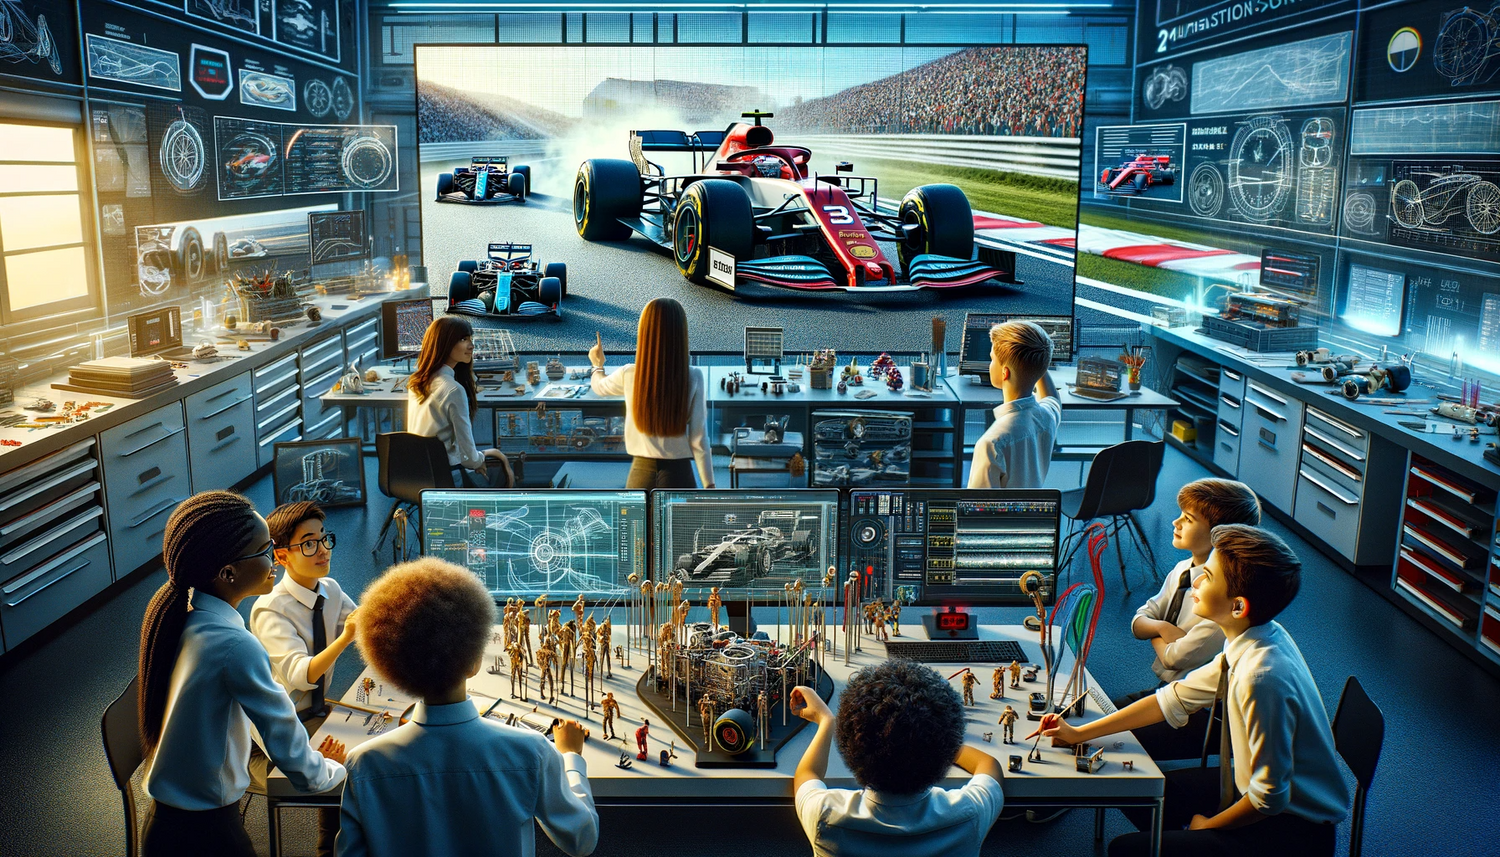 Ignite the Excitement: The Lights Out Racing Blog - FORMULA ONE Racing: A Gateway to STEM Education